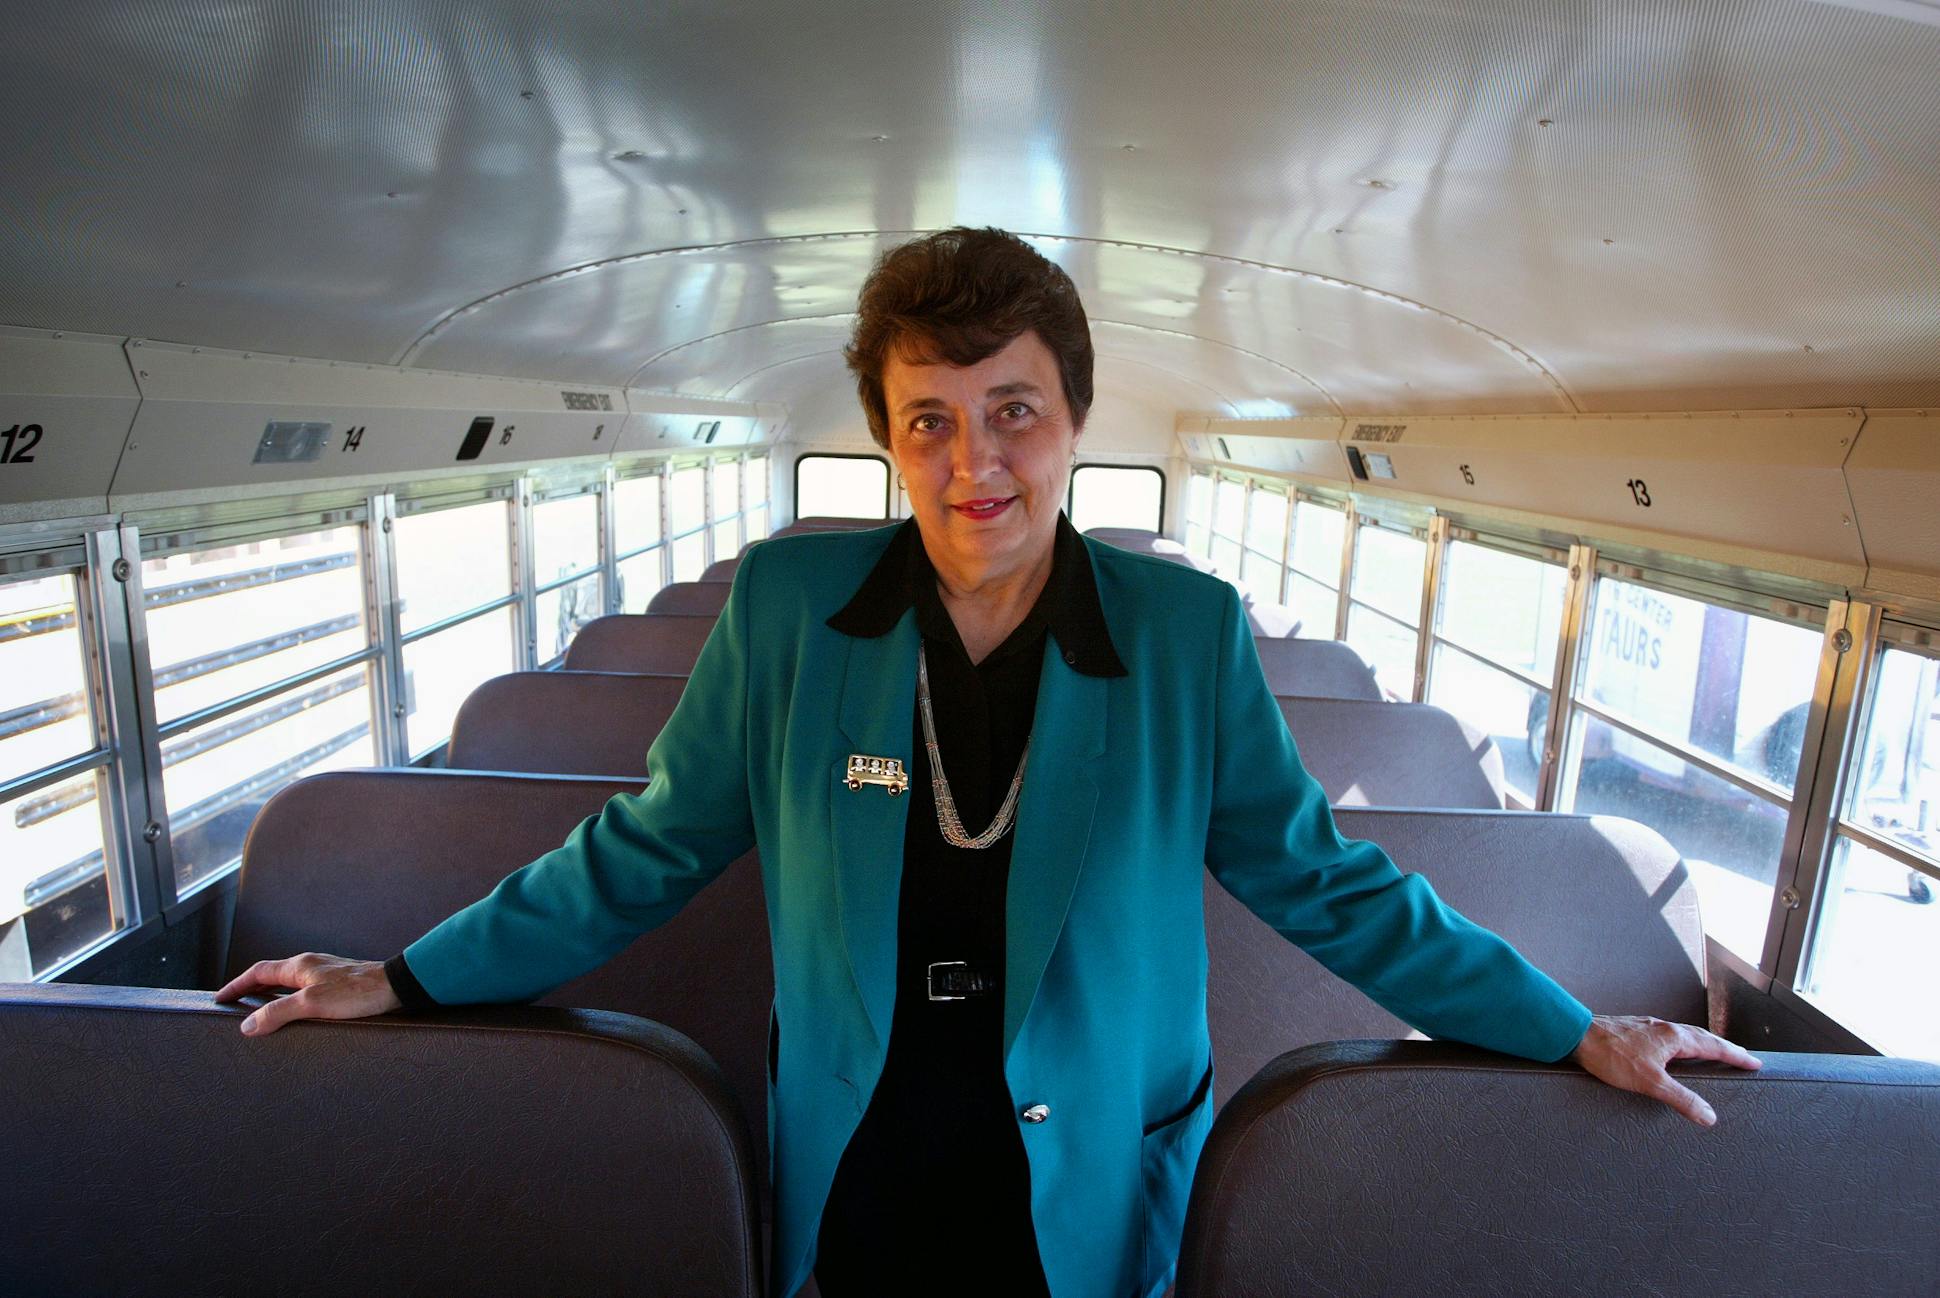 Dorothy McIntyre is retiring after over 30 years with the Minnesota State High School League. McIntyre is an associate director who was a pioneer in establishing girls sports programs and tournaments. As a high school coach, she learned to drive a school bus to take her gymnastics team to meets because her school, Eden Prairie, didn't want to provide a driver.